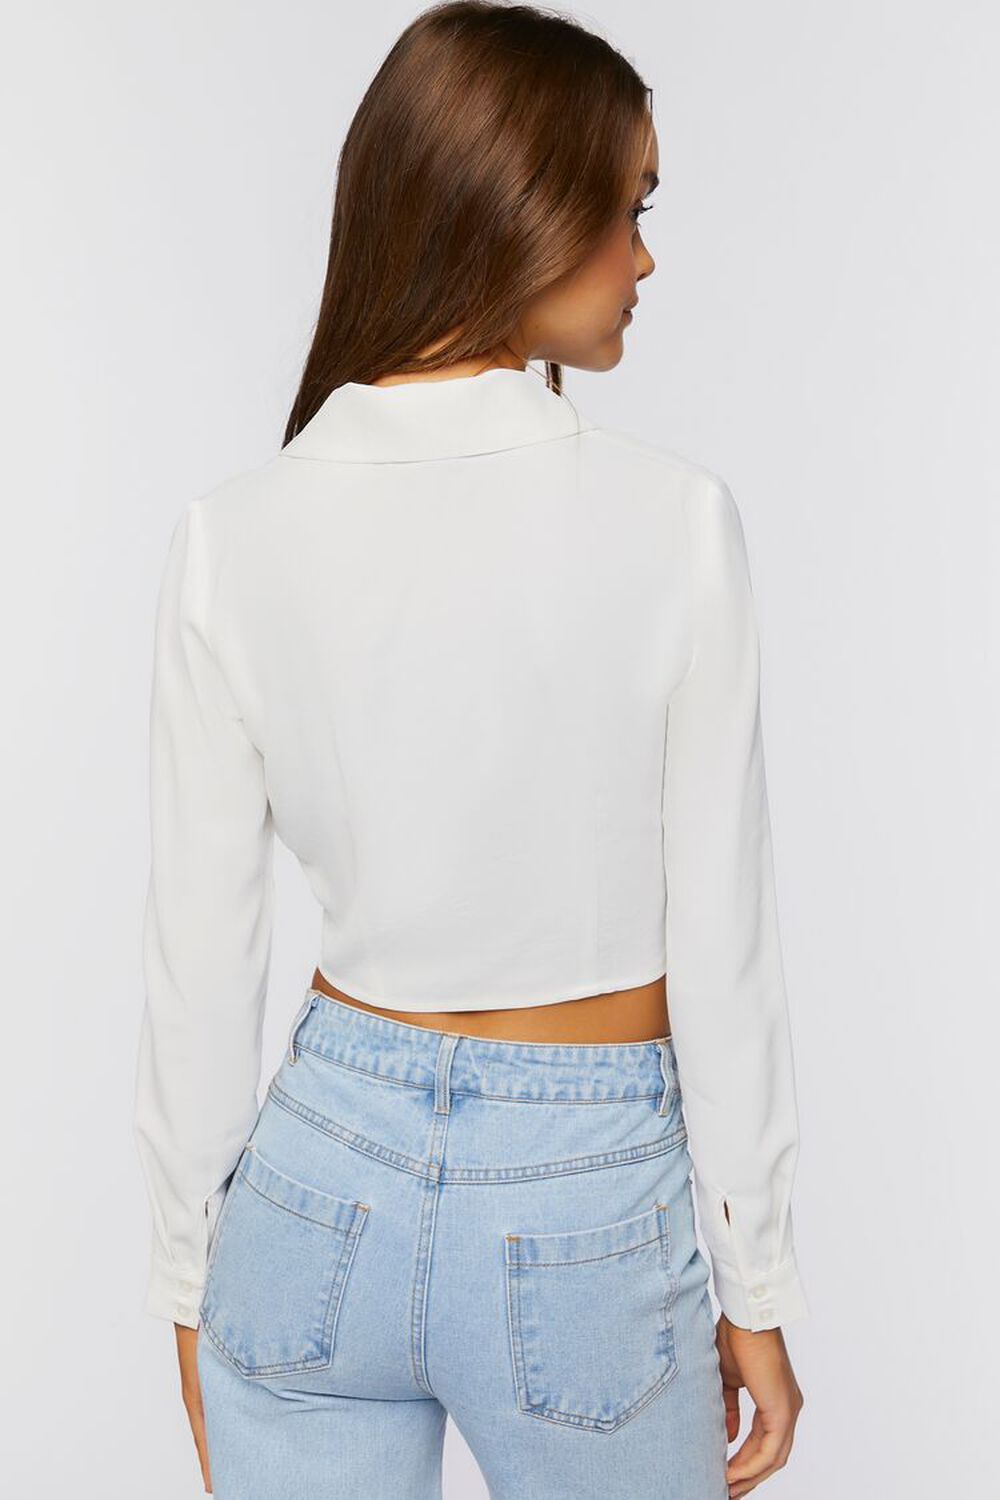 WHITE Cropped Bustier Shirt, image 3